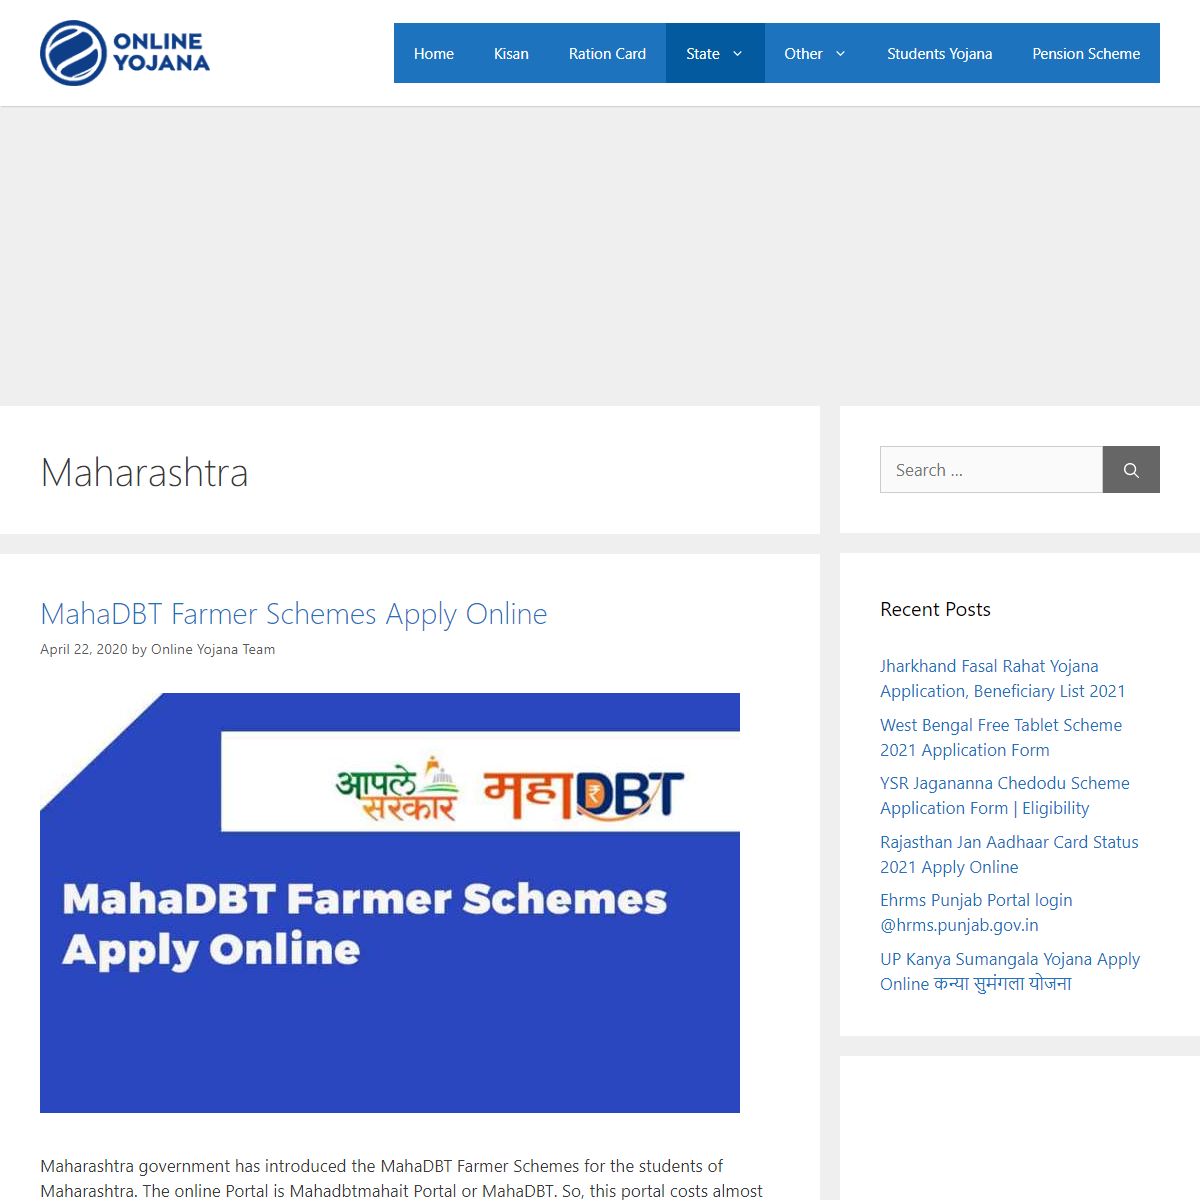 A complete backup of https://onlineyojana.in/category/state-government/maharashtra/